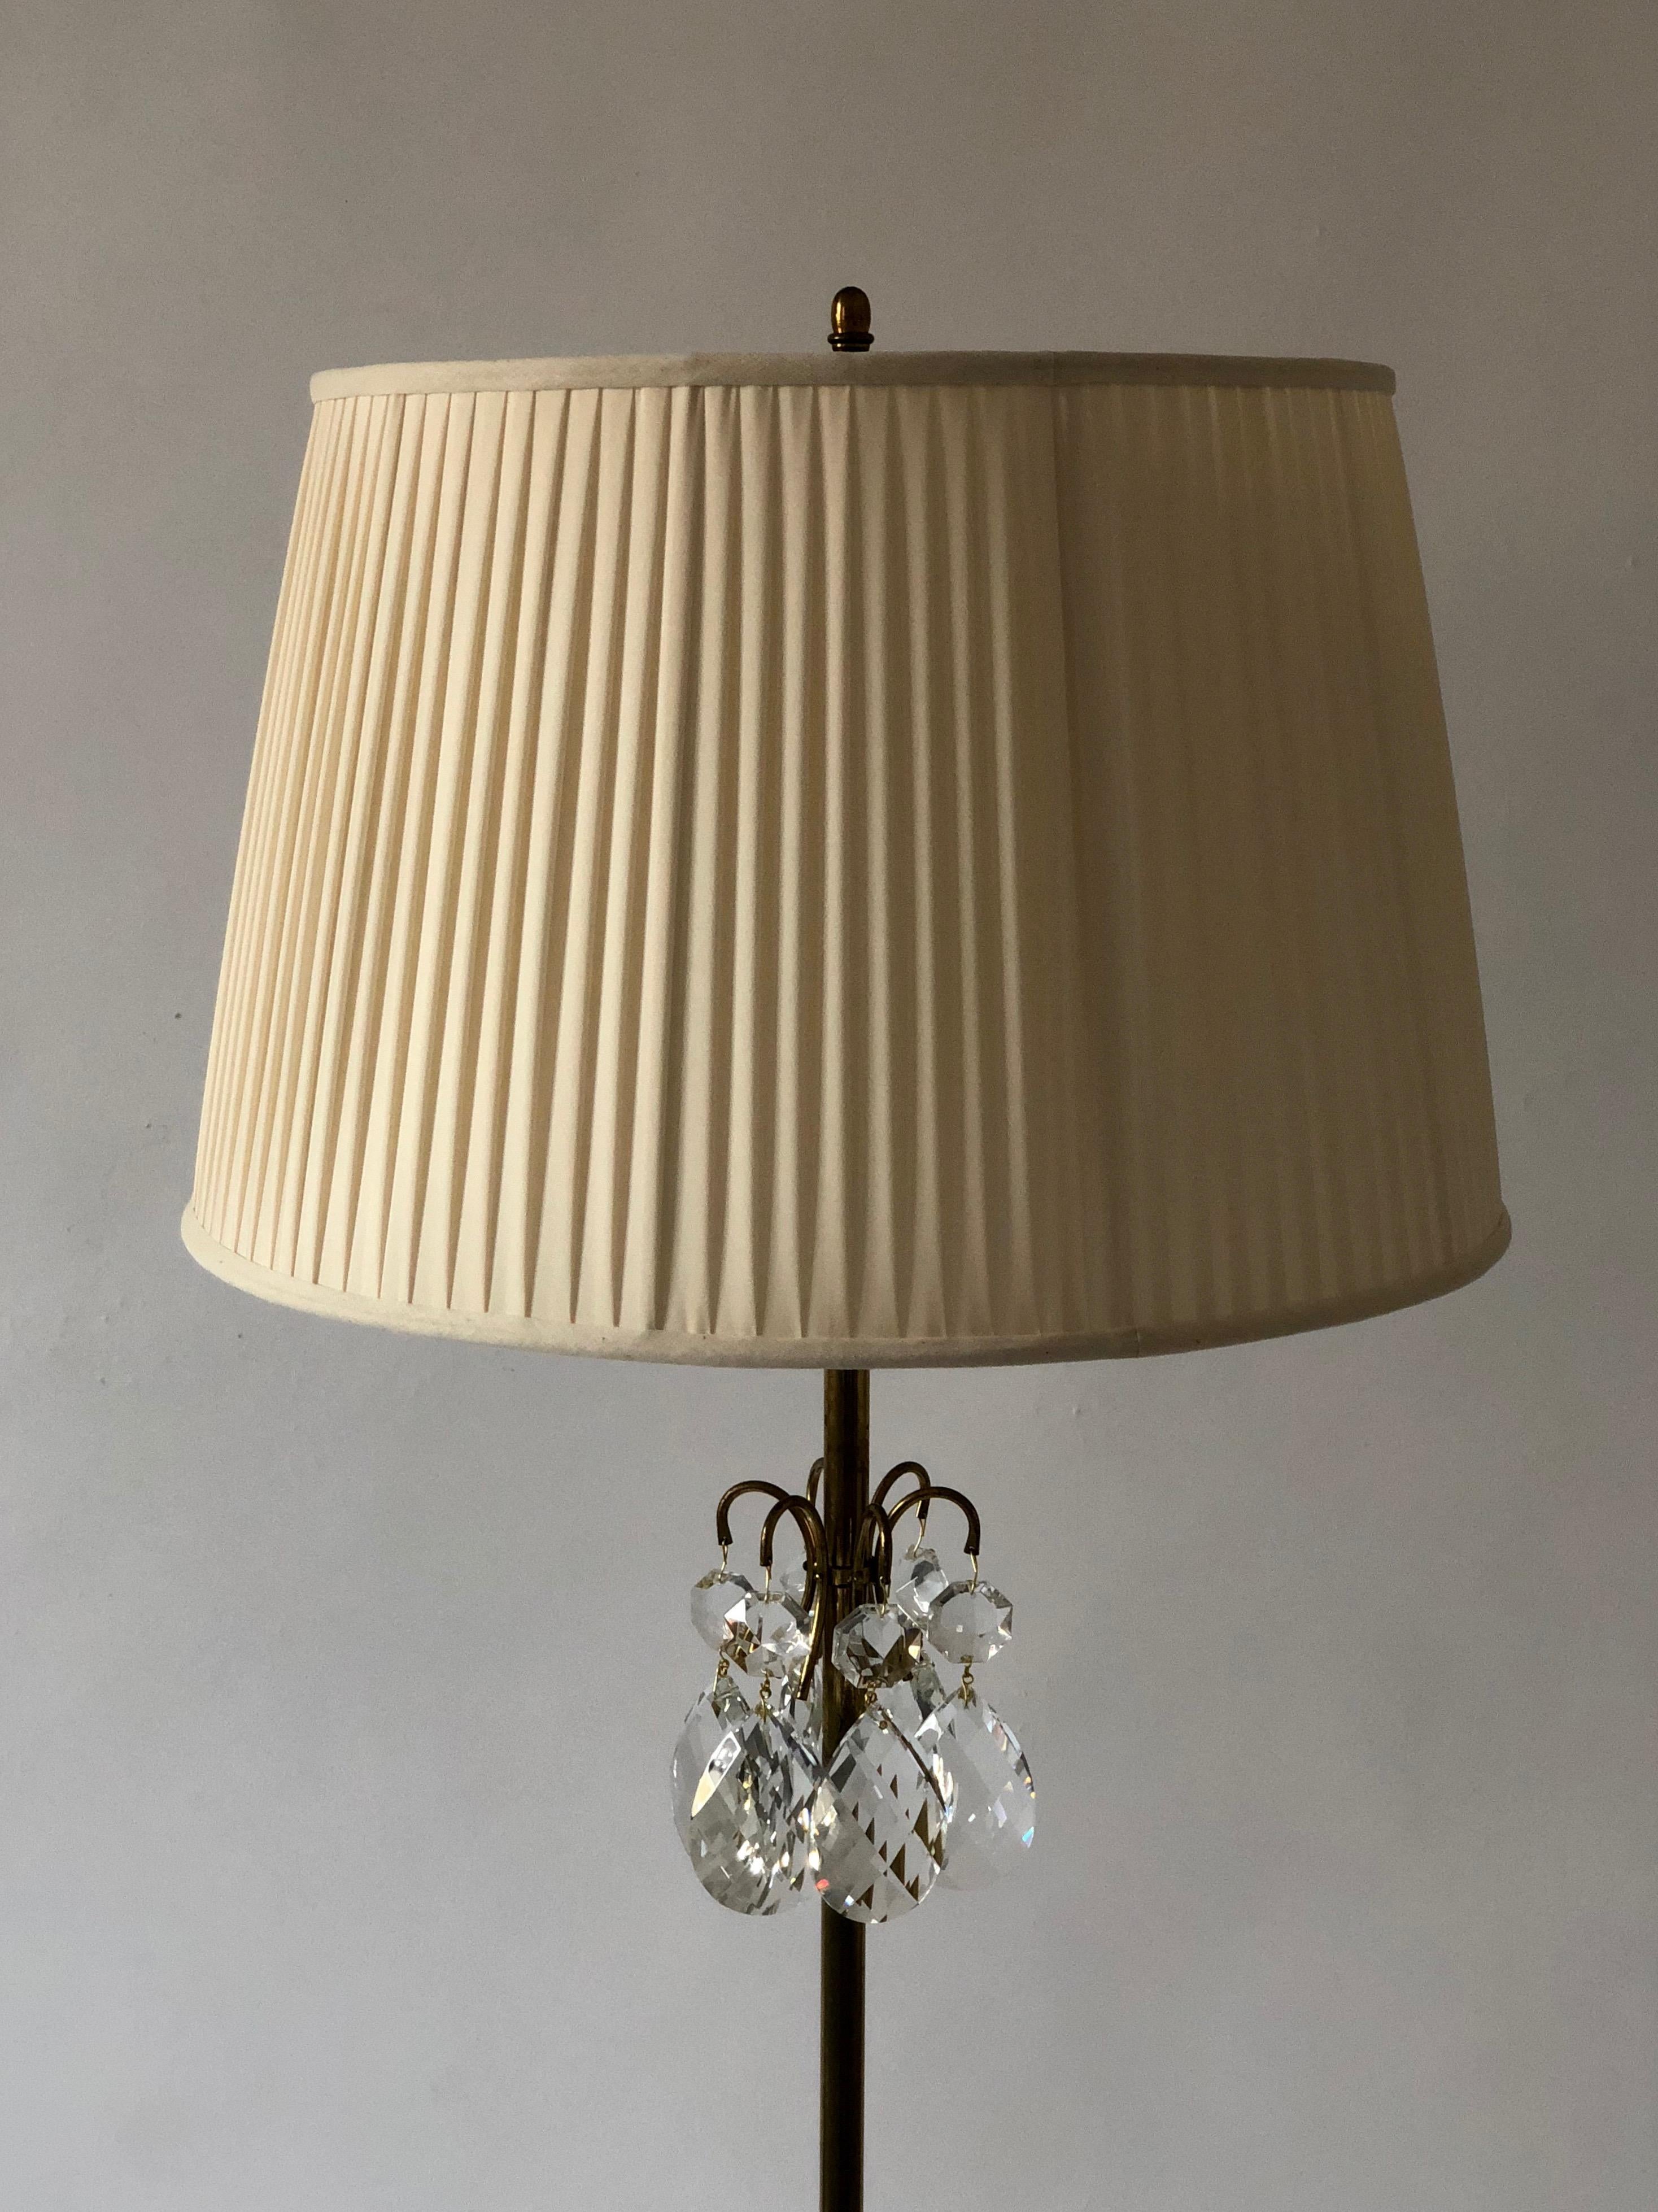 A beautiful example of a Lobmeyr brass floor lamp with hand ground crystal glass elements combined
with detailed metal work. The silk shade is new as is the electrical wire.
I hope that the photos give your insight to the elegance represented here.